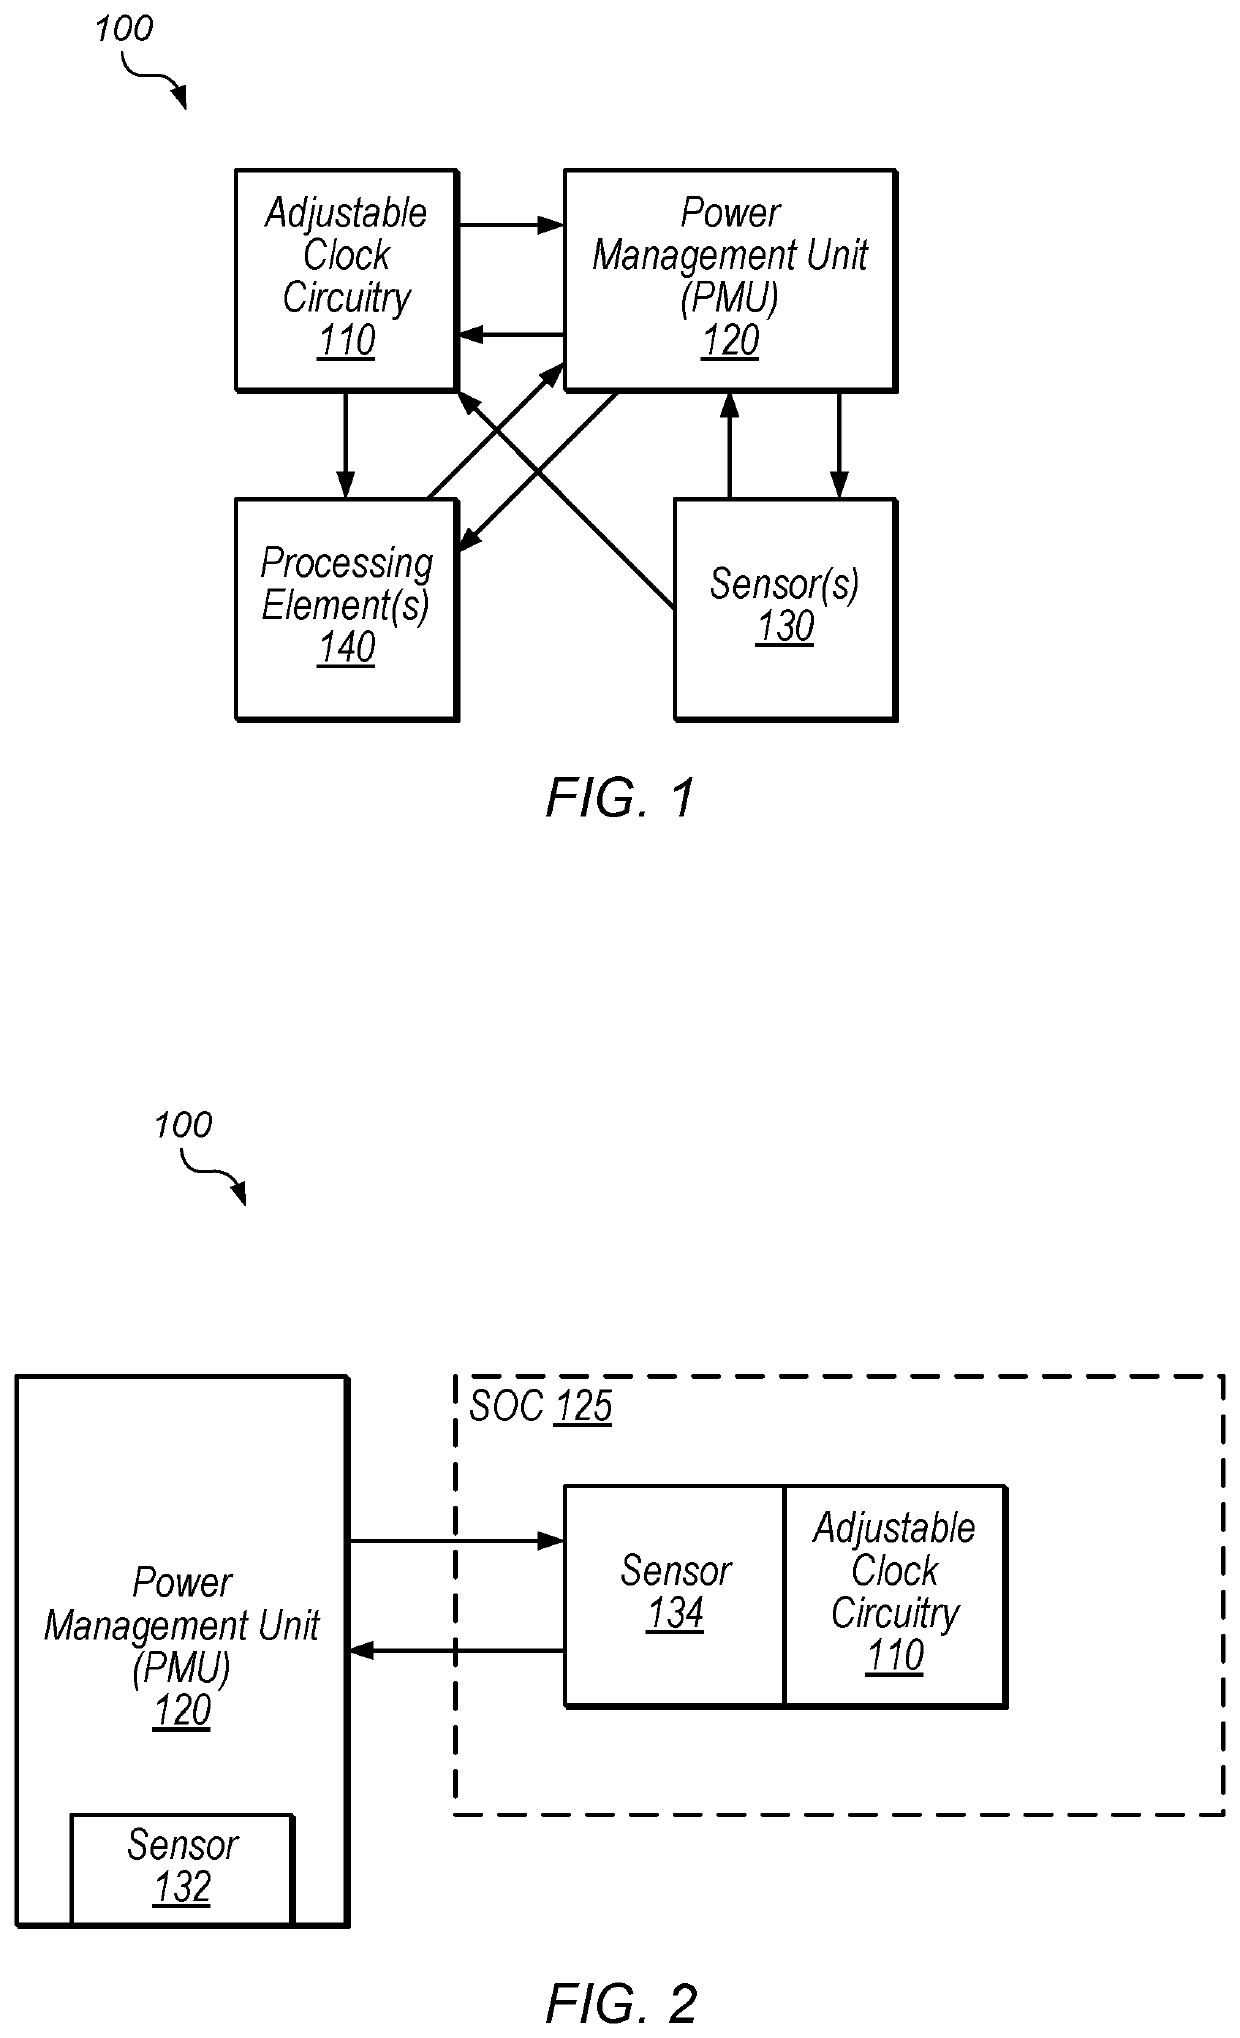 Detecting power supply noise events and initiating corrective action